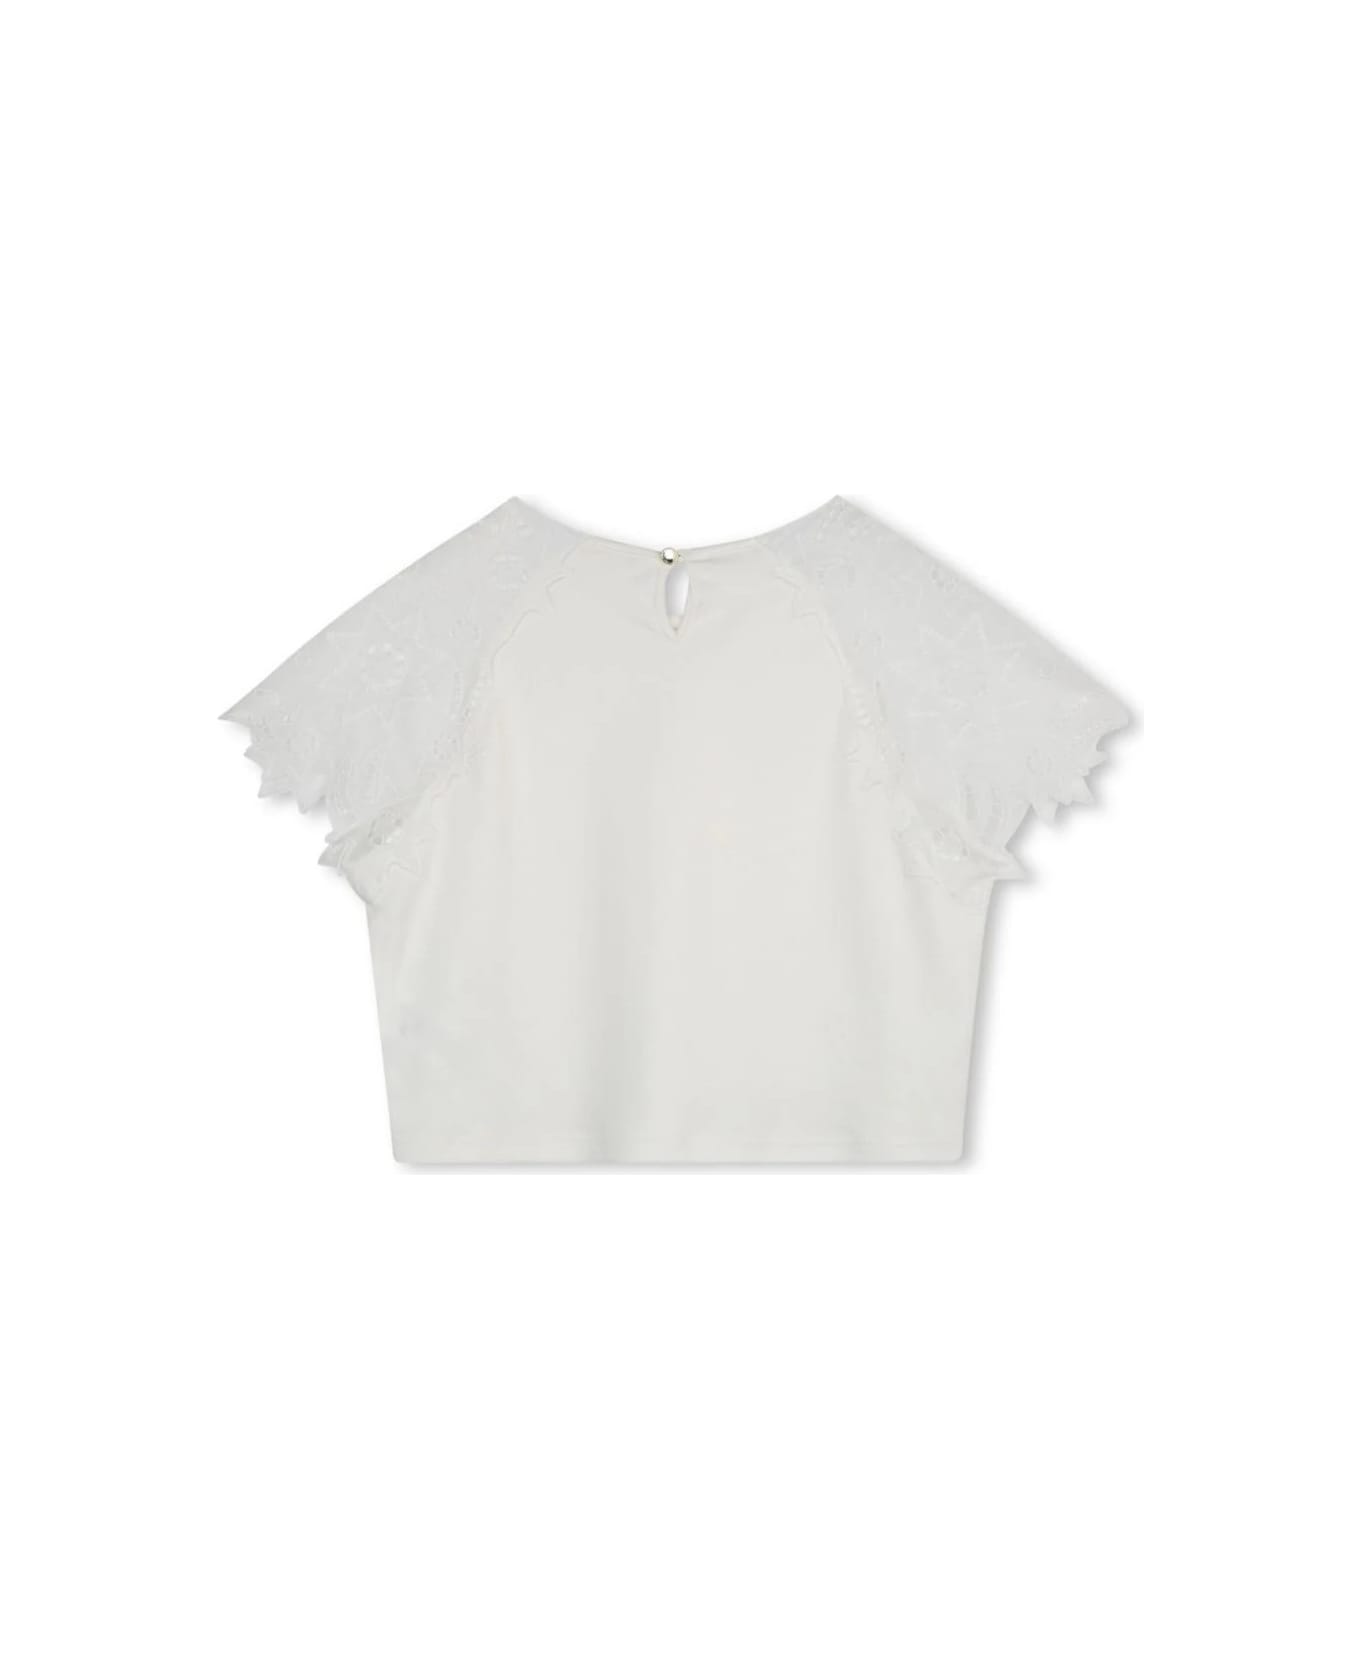 Chloé White Top With Guipure Lace - White